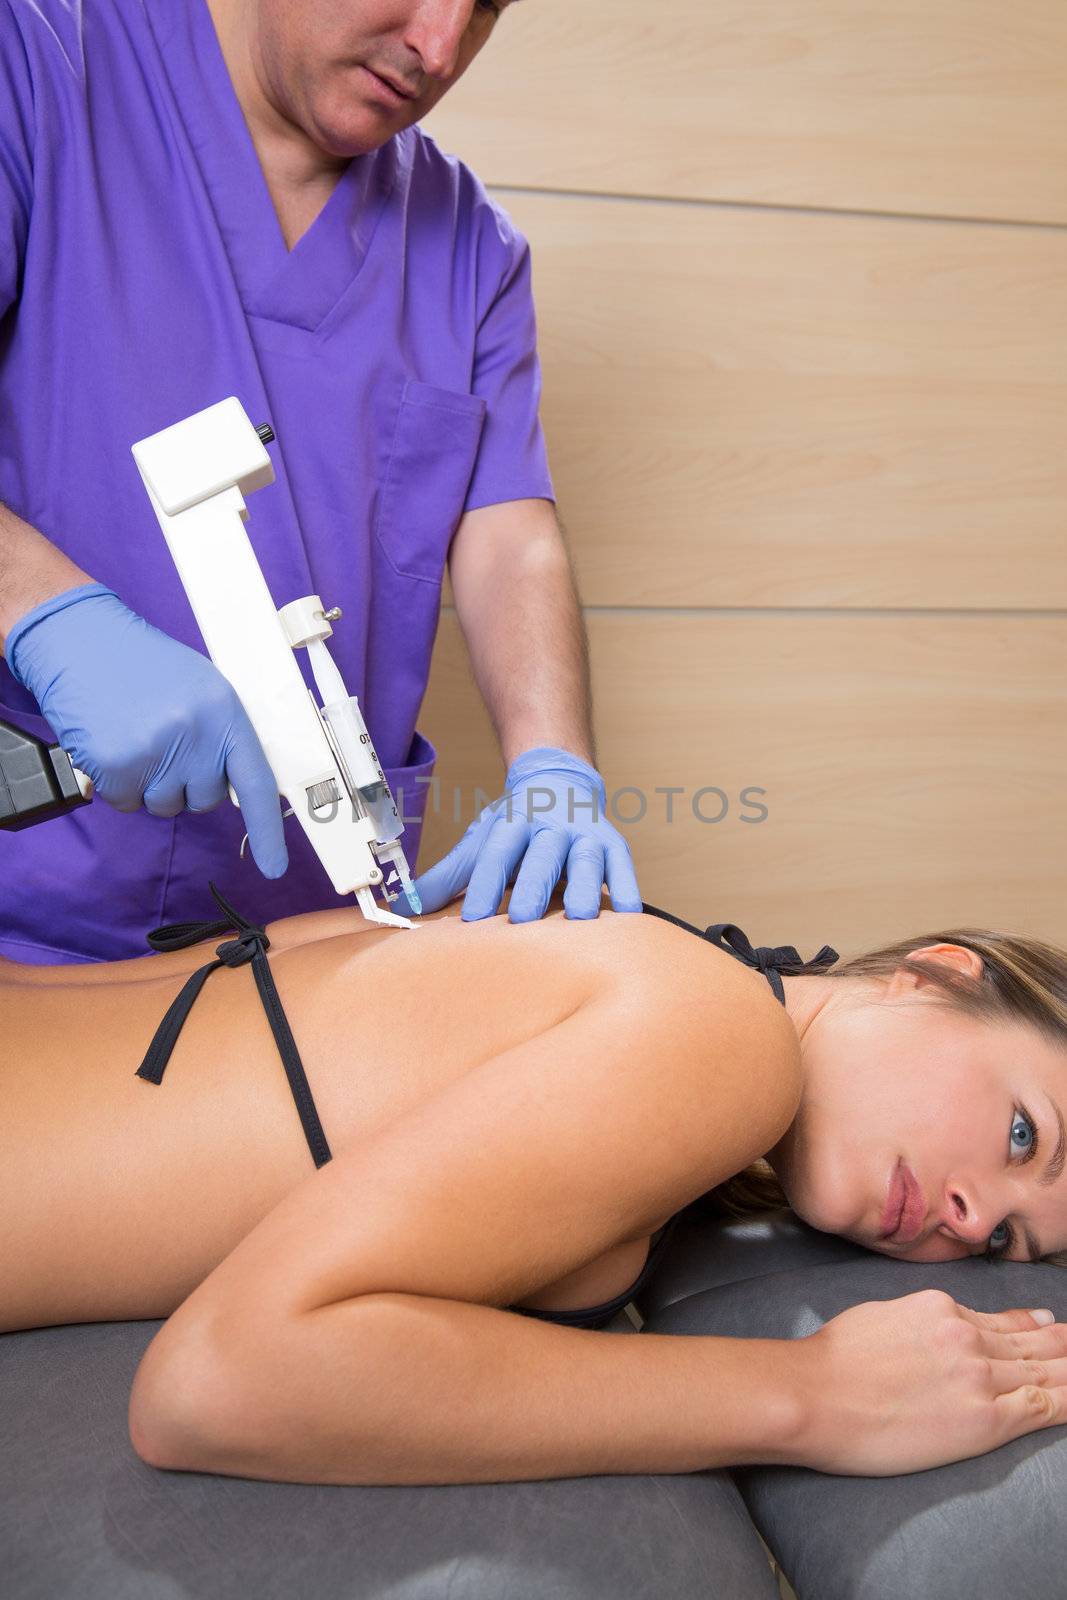 Back lumbar mesotherapy gun doctor therapy with woman patient on bed